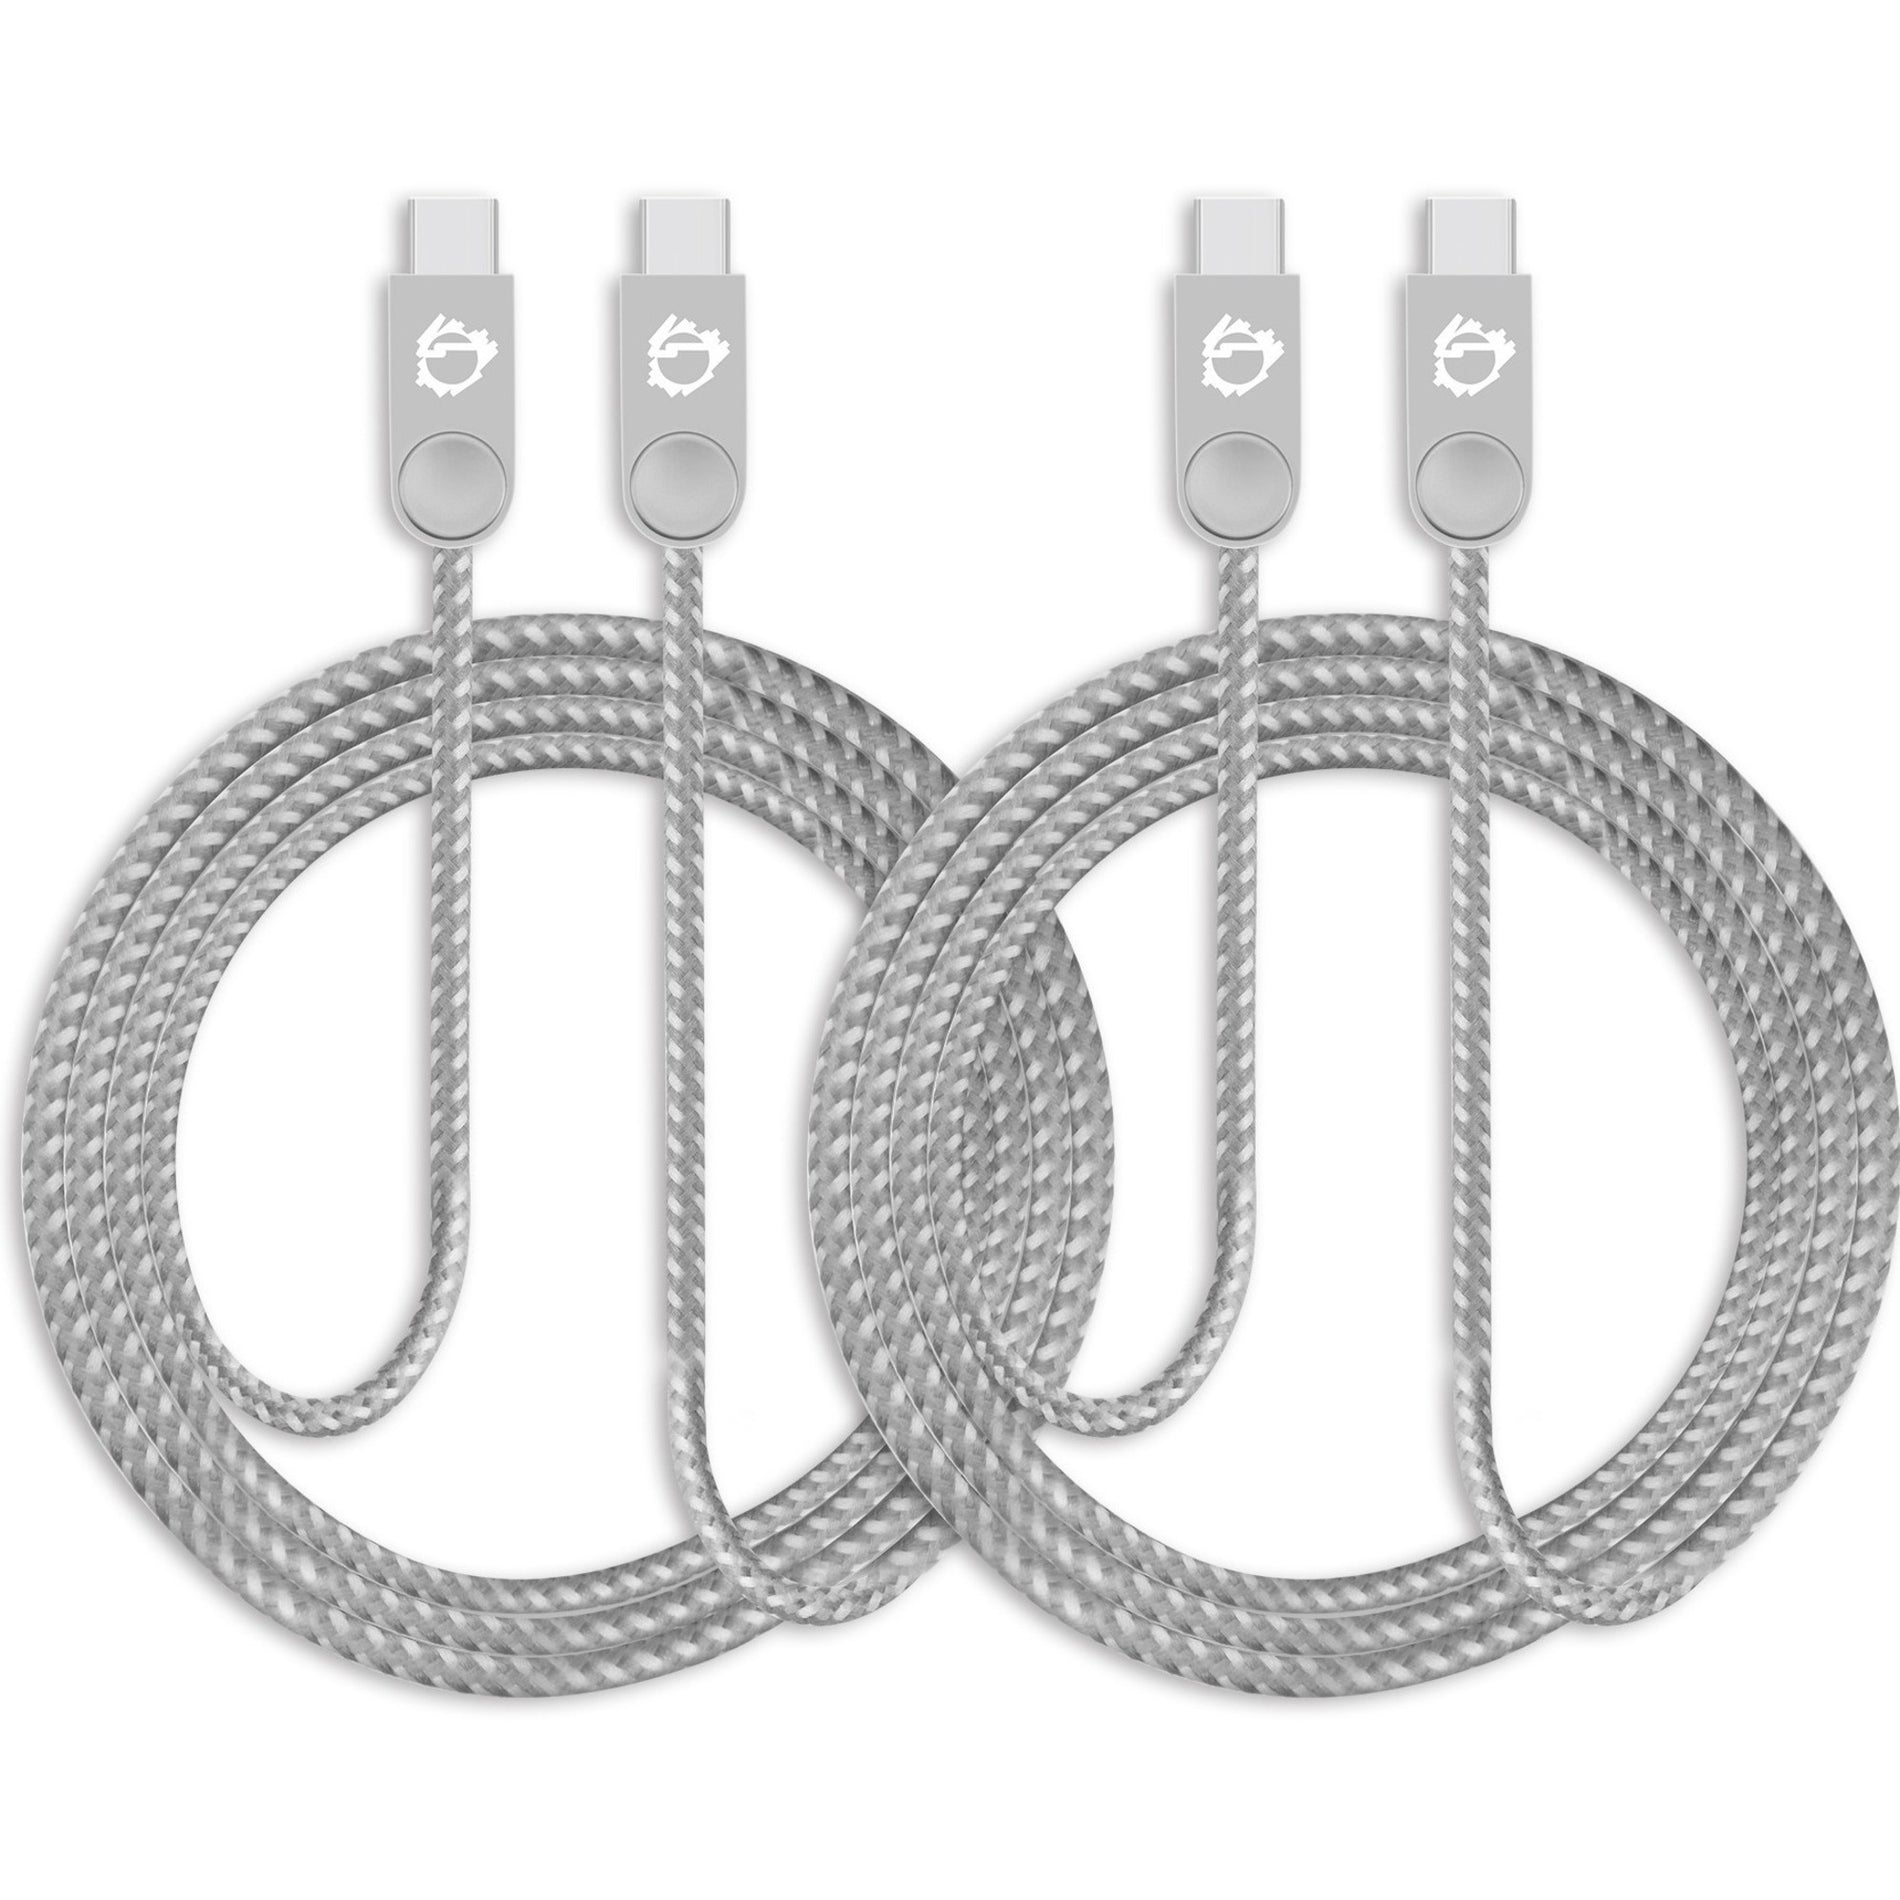 SIIG CB-US0L11-S1 Zinc Alloy USB-C to USB-C Charging & Sync Braided Cable - 3.3ft, 2-Pack, Durable and Reversible